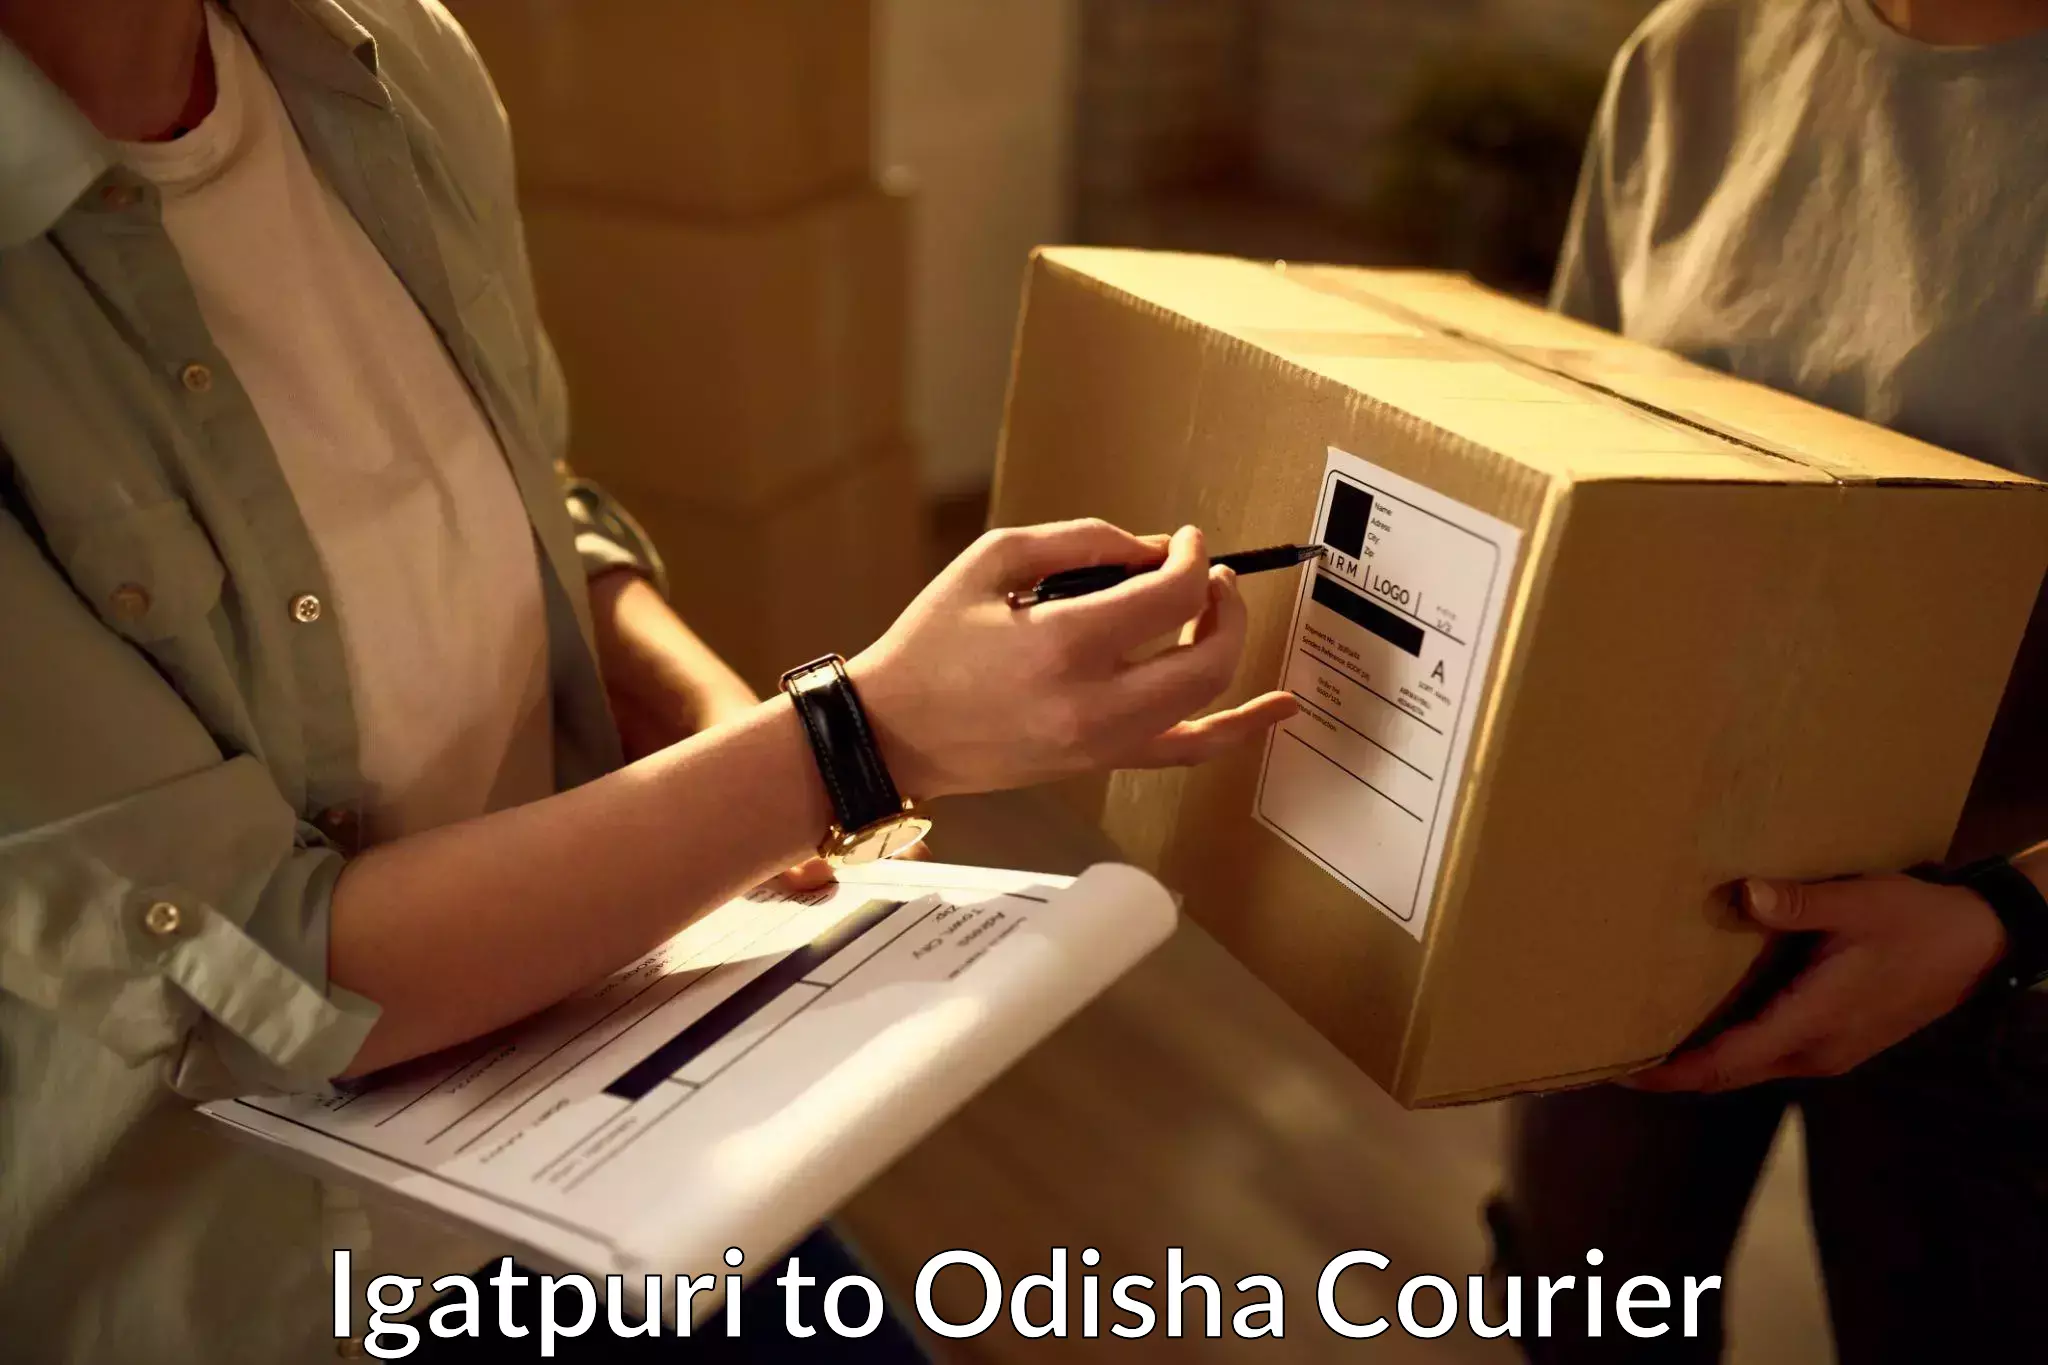 Cash on delivery service Igatpuri to Paradip Port